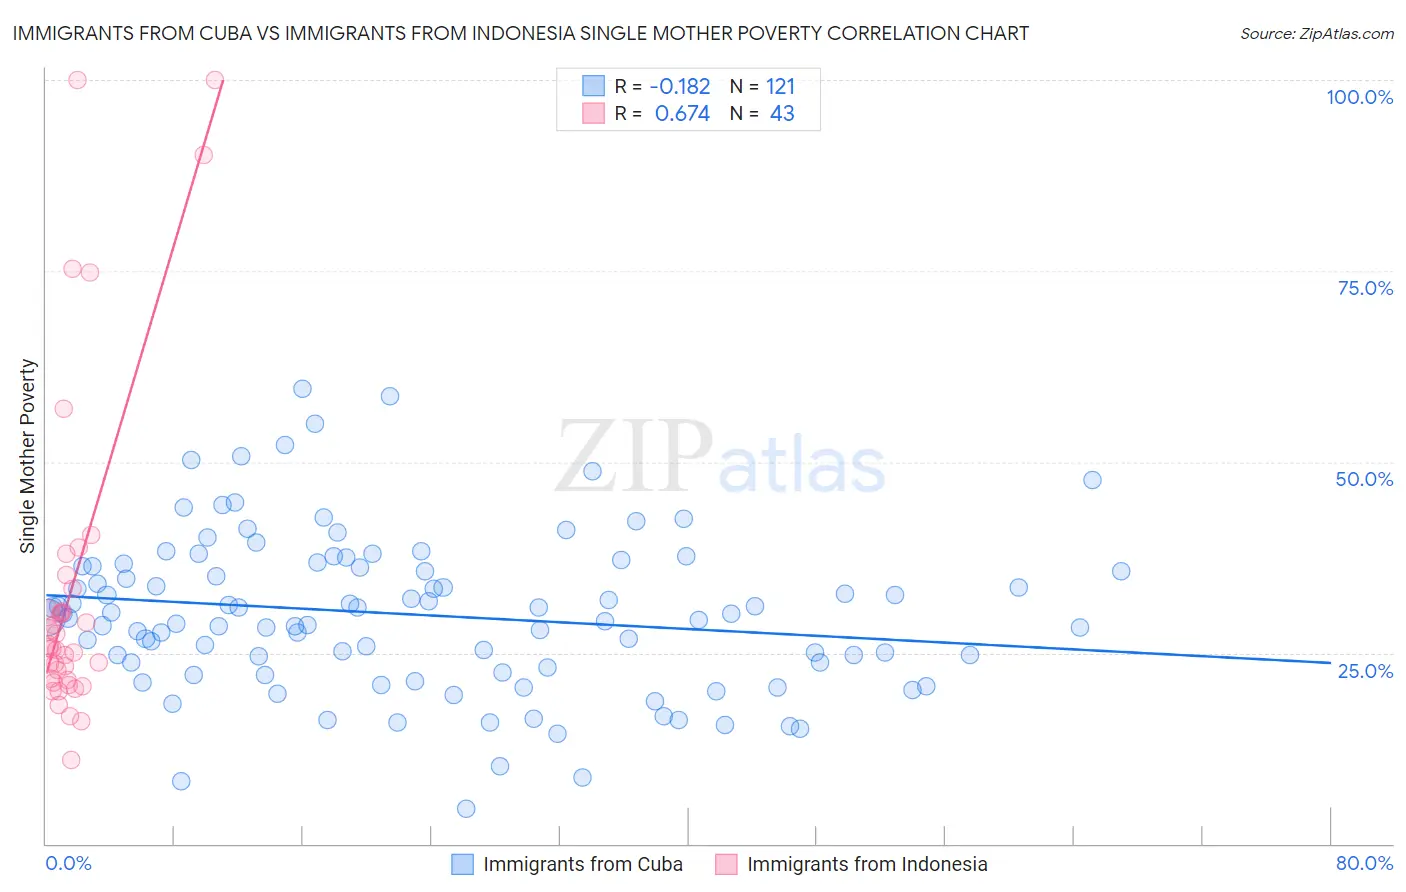 Immigrants from Cuba vs Immigrants from Indonesia Single Mother Poverty